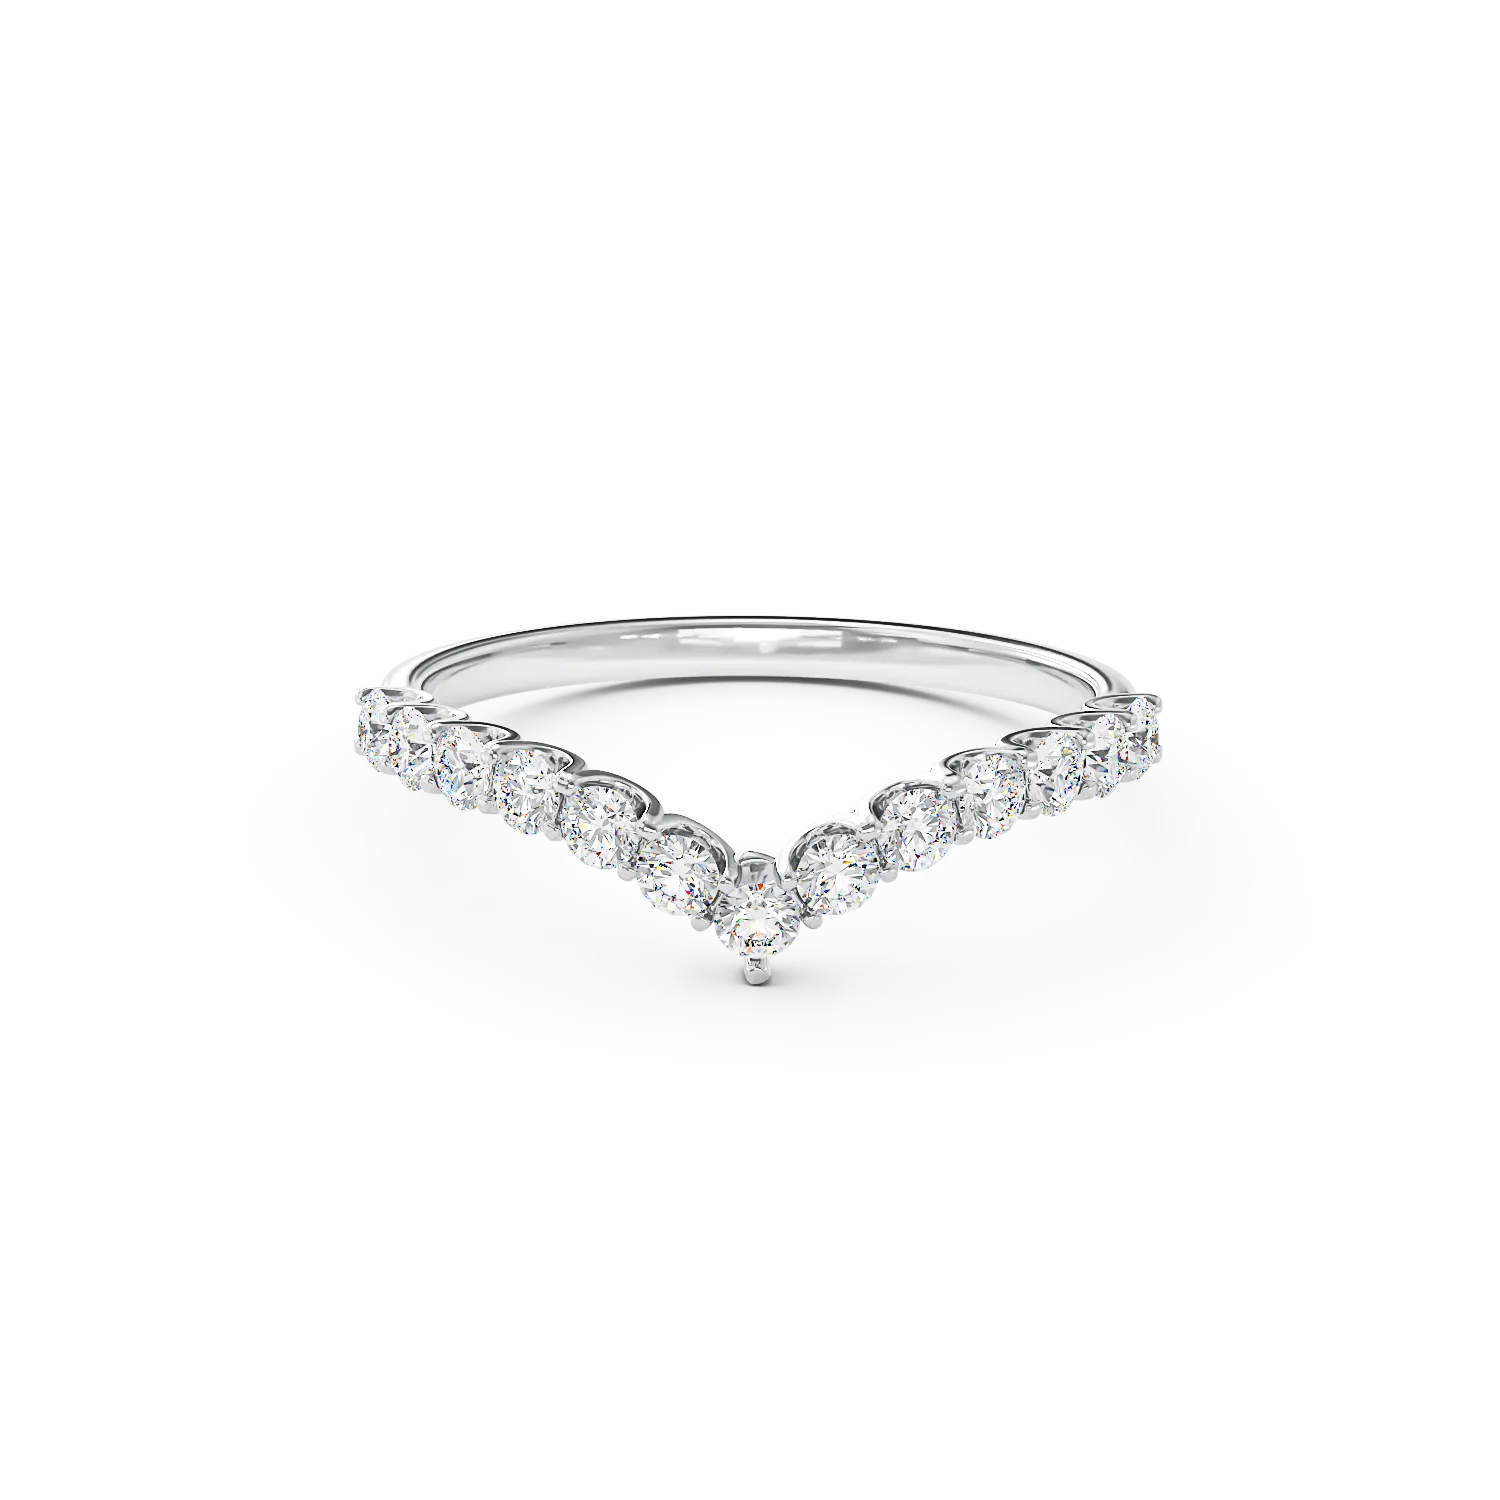 Half eternity ring in white gold with 0.5ct diamonds